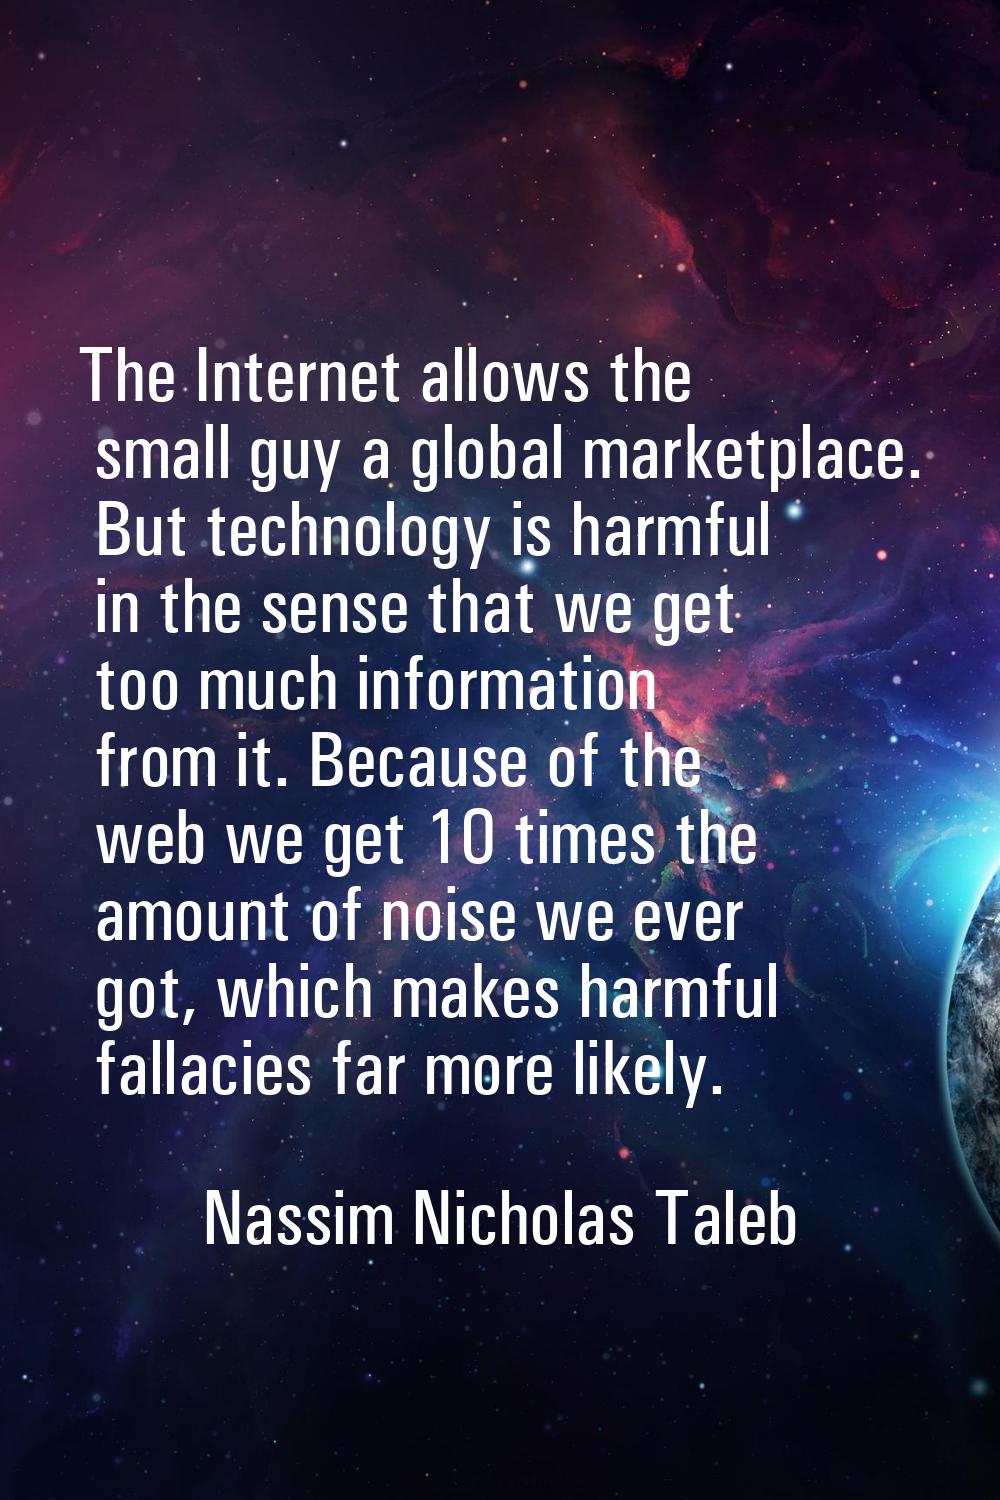 The Internet allows the small guy a global marketplace. But technology is harmful in the sense that